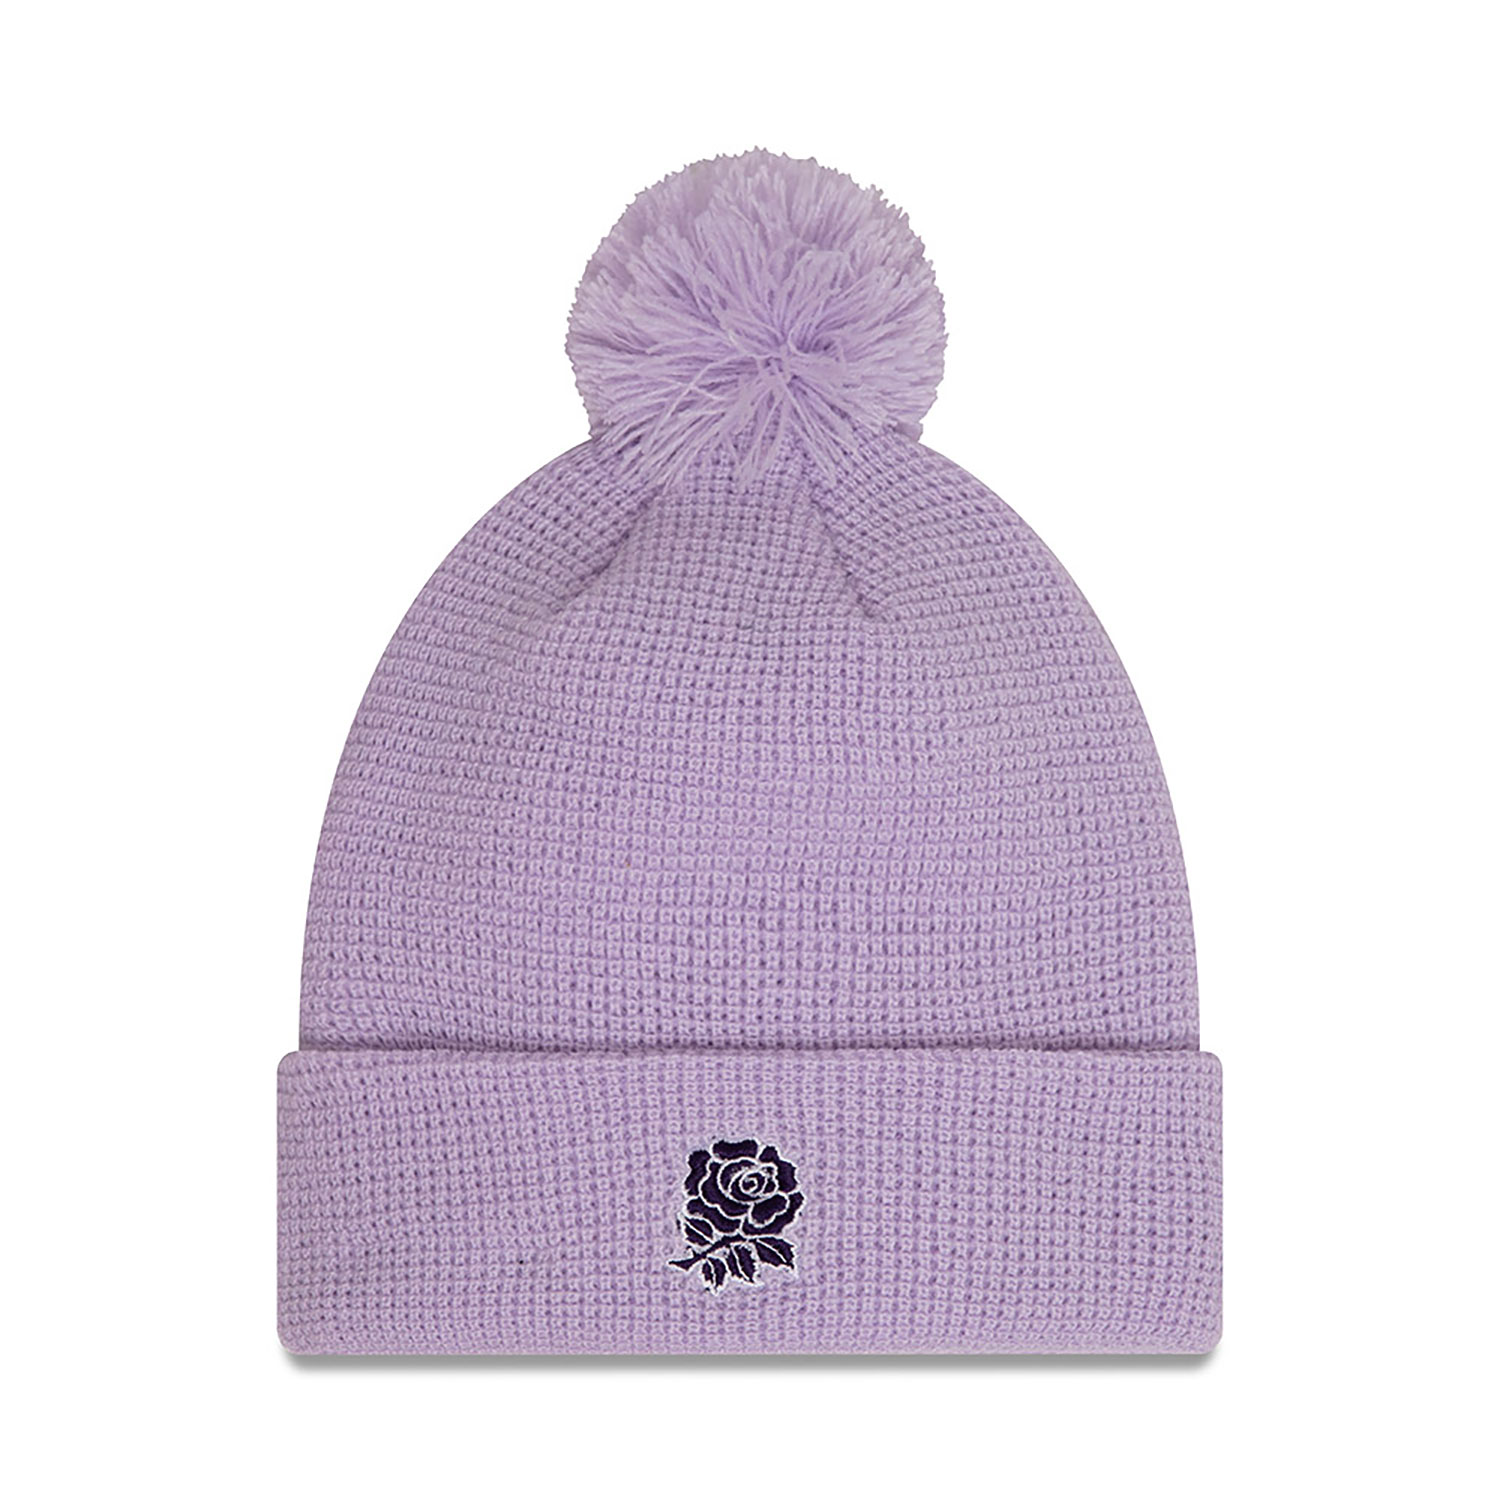 Rugby Football Union Purple Waffle Knit Beanie Hat